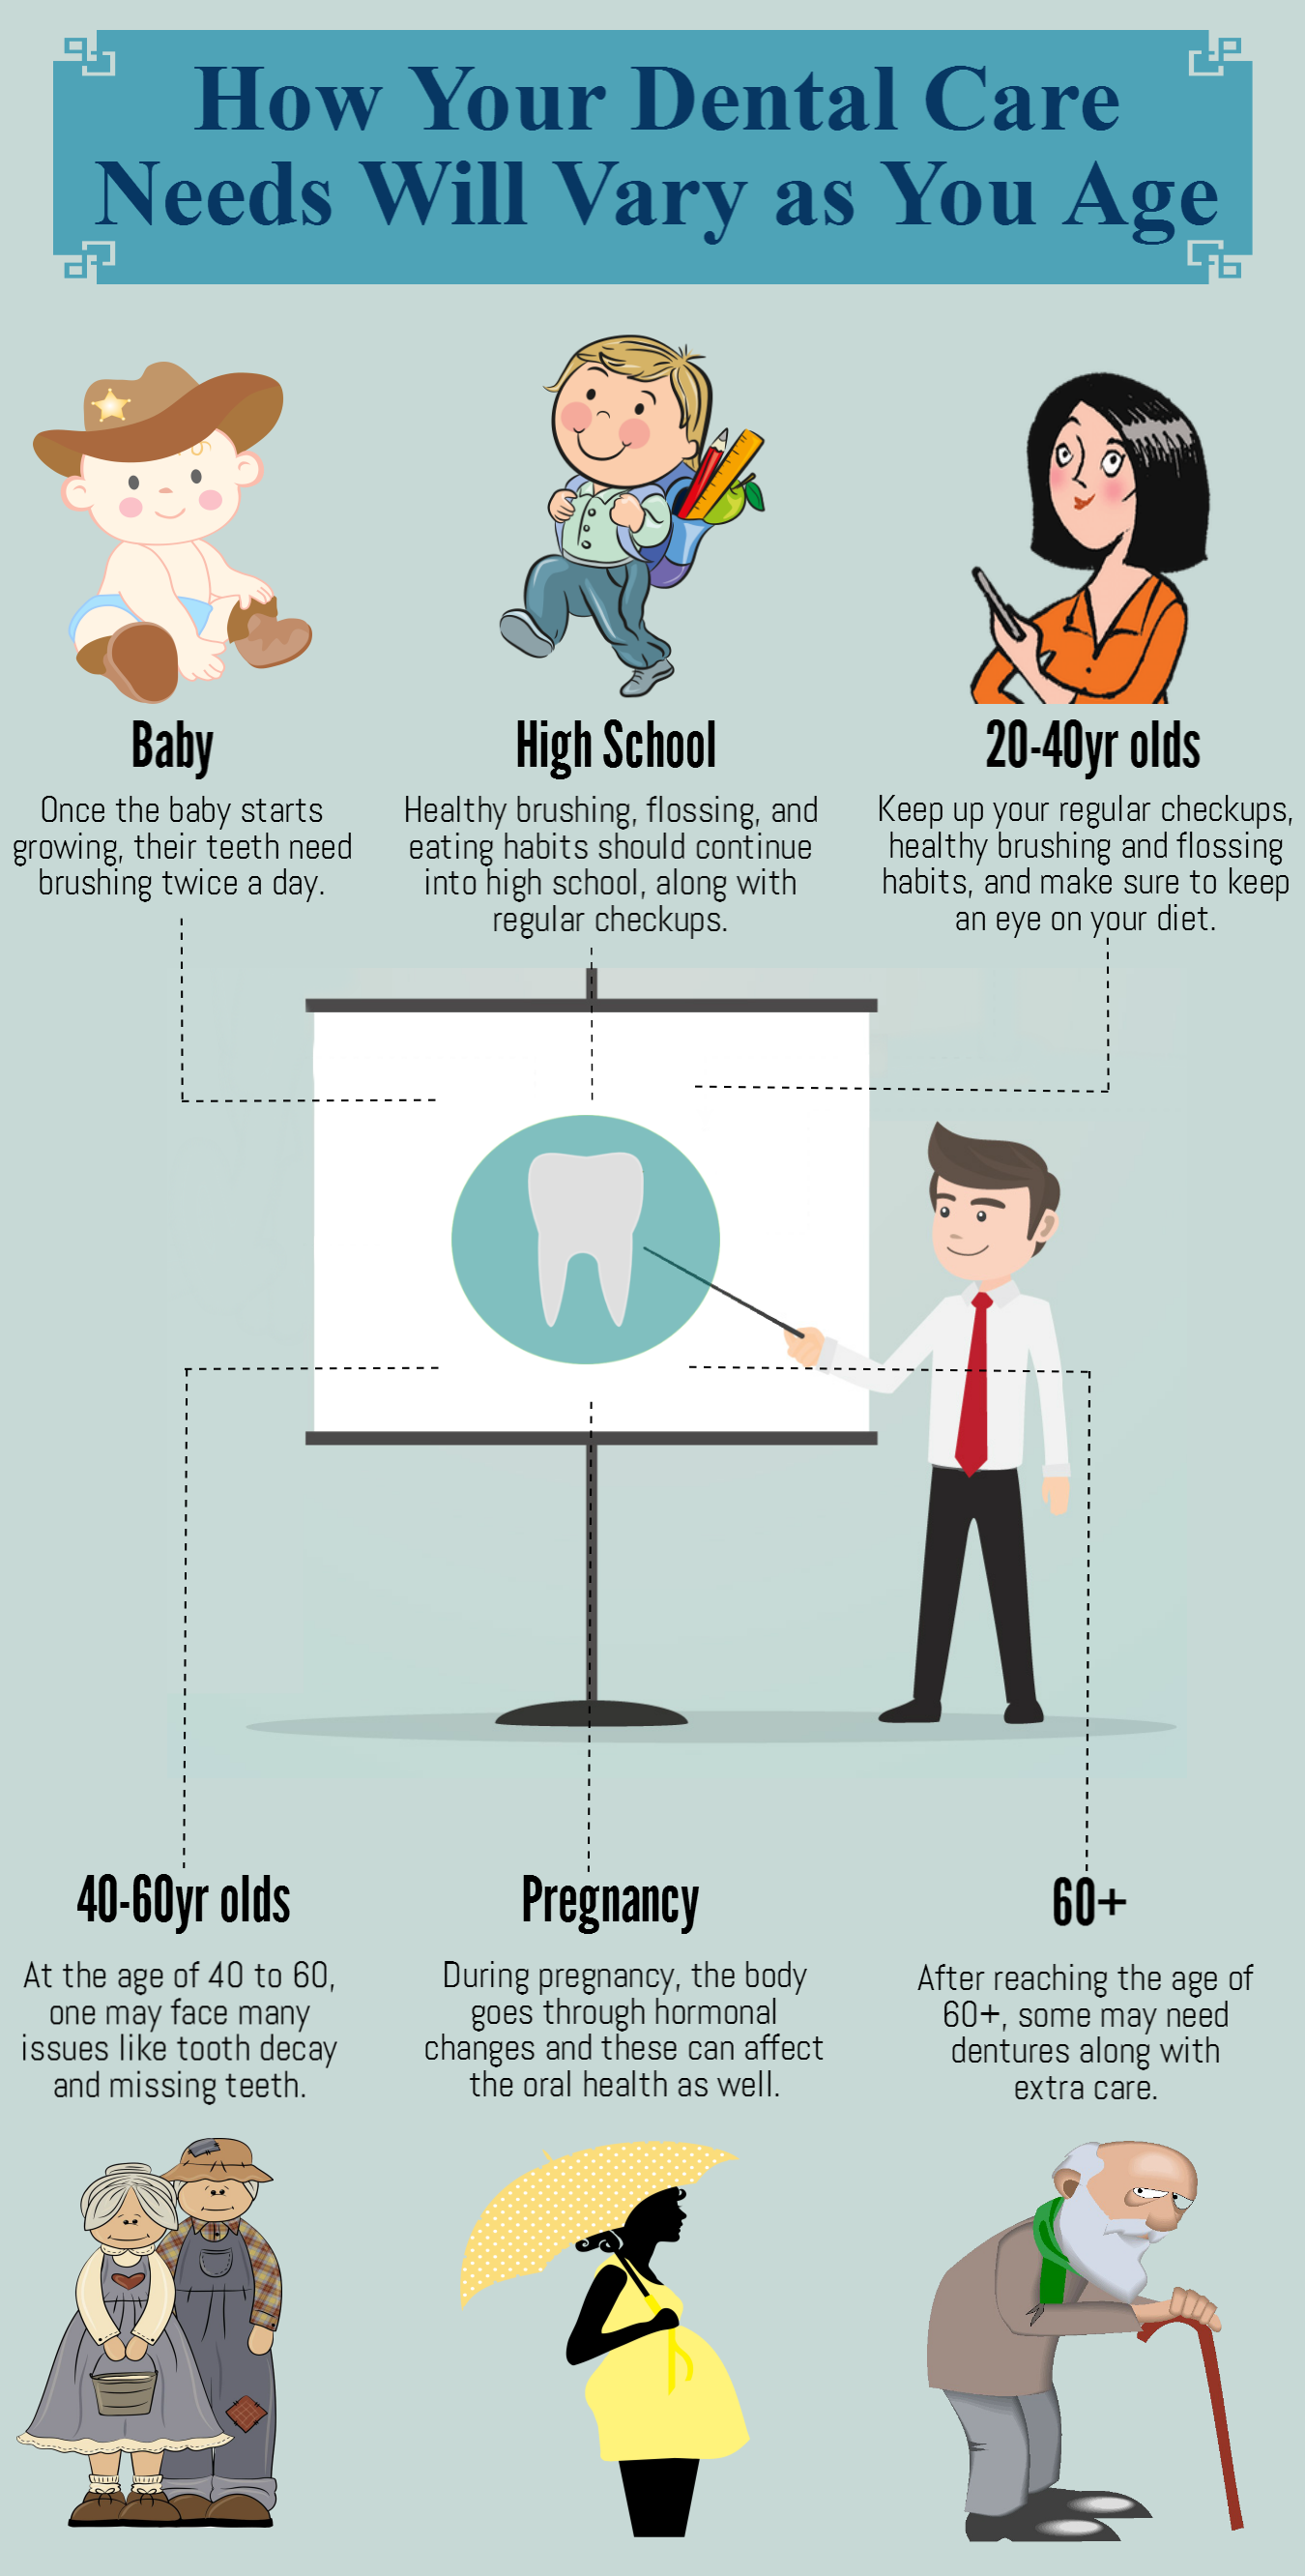 How Your Dental Care Needs Will Vary as You Age